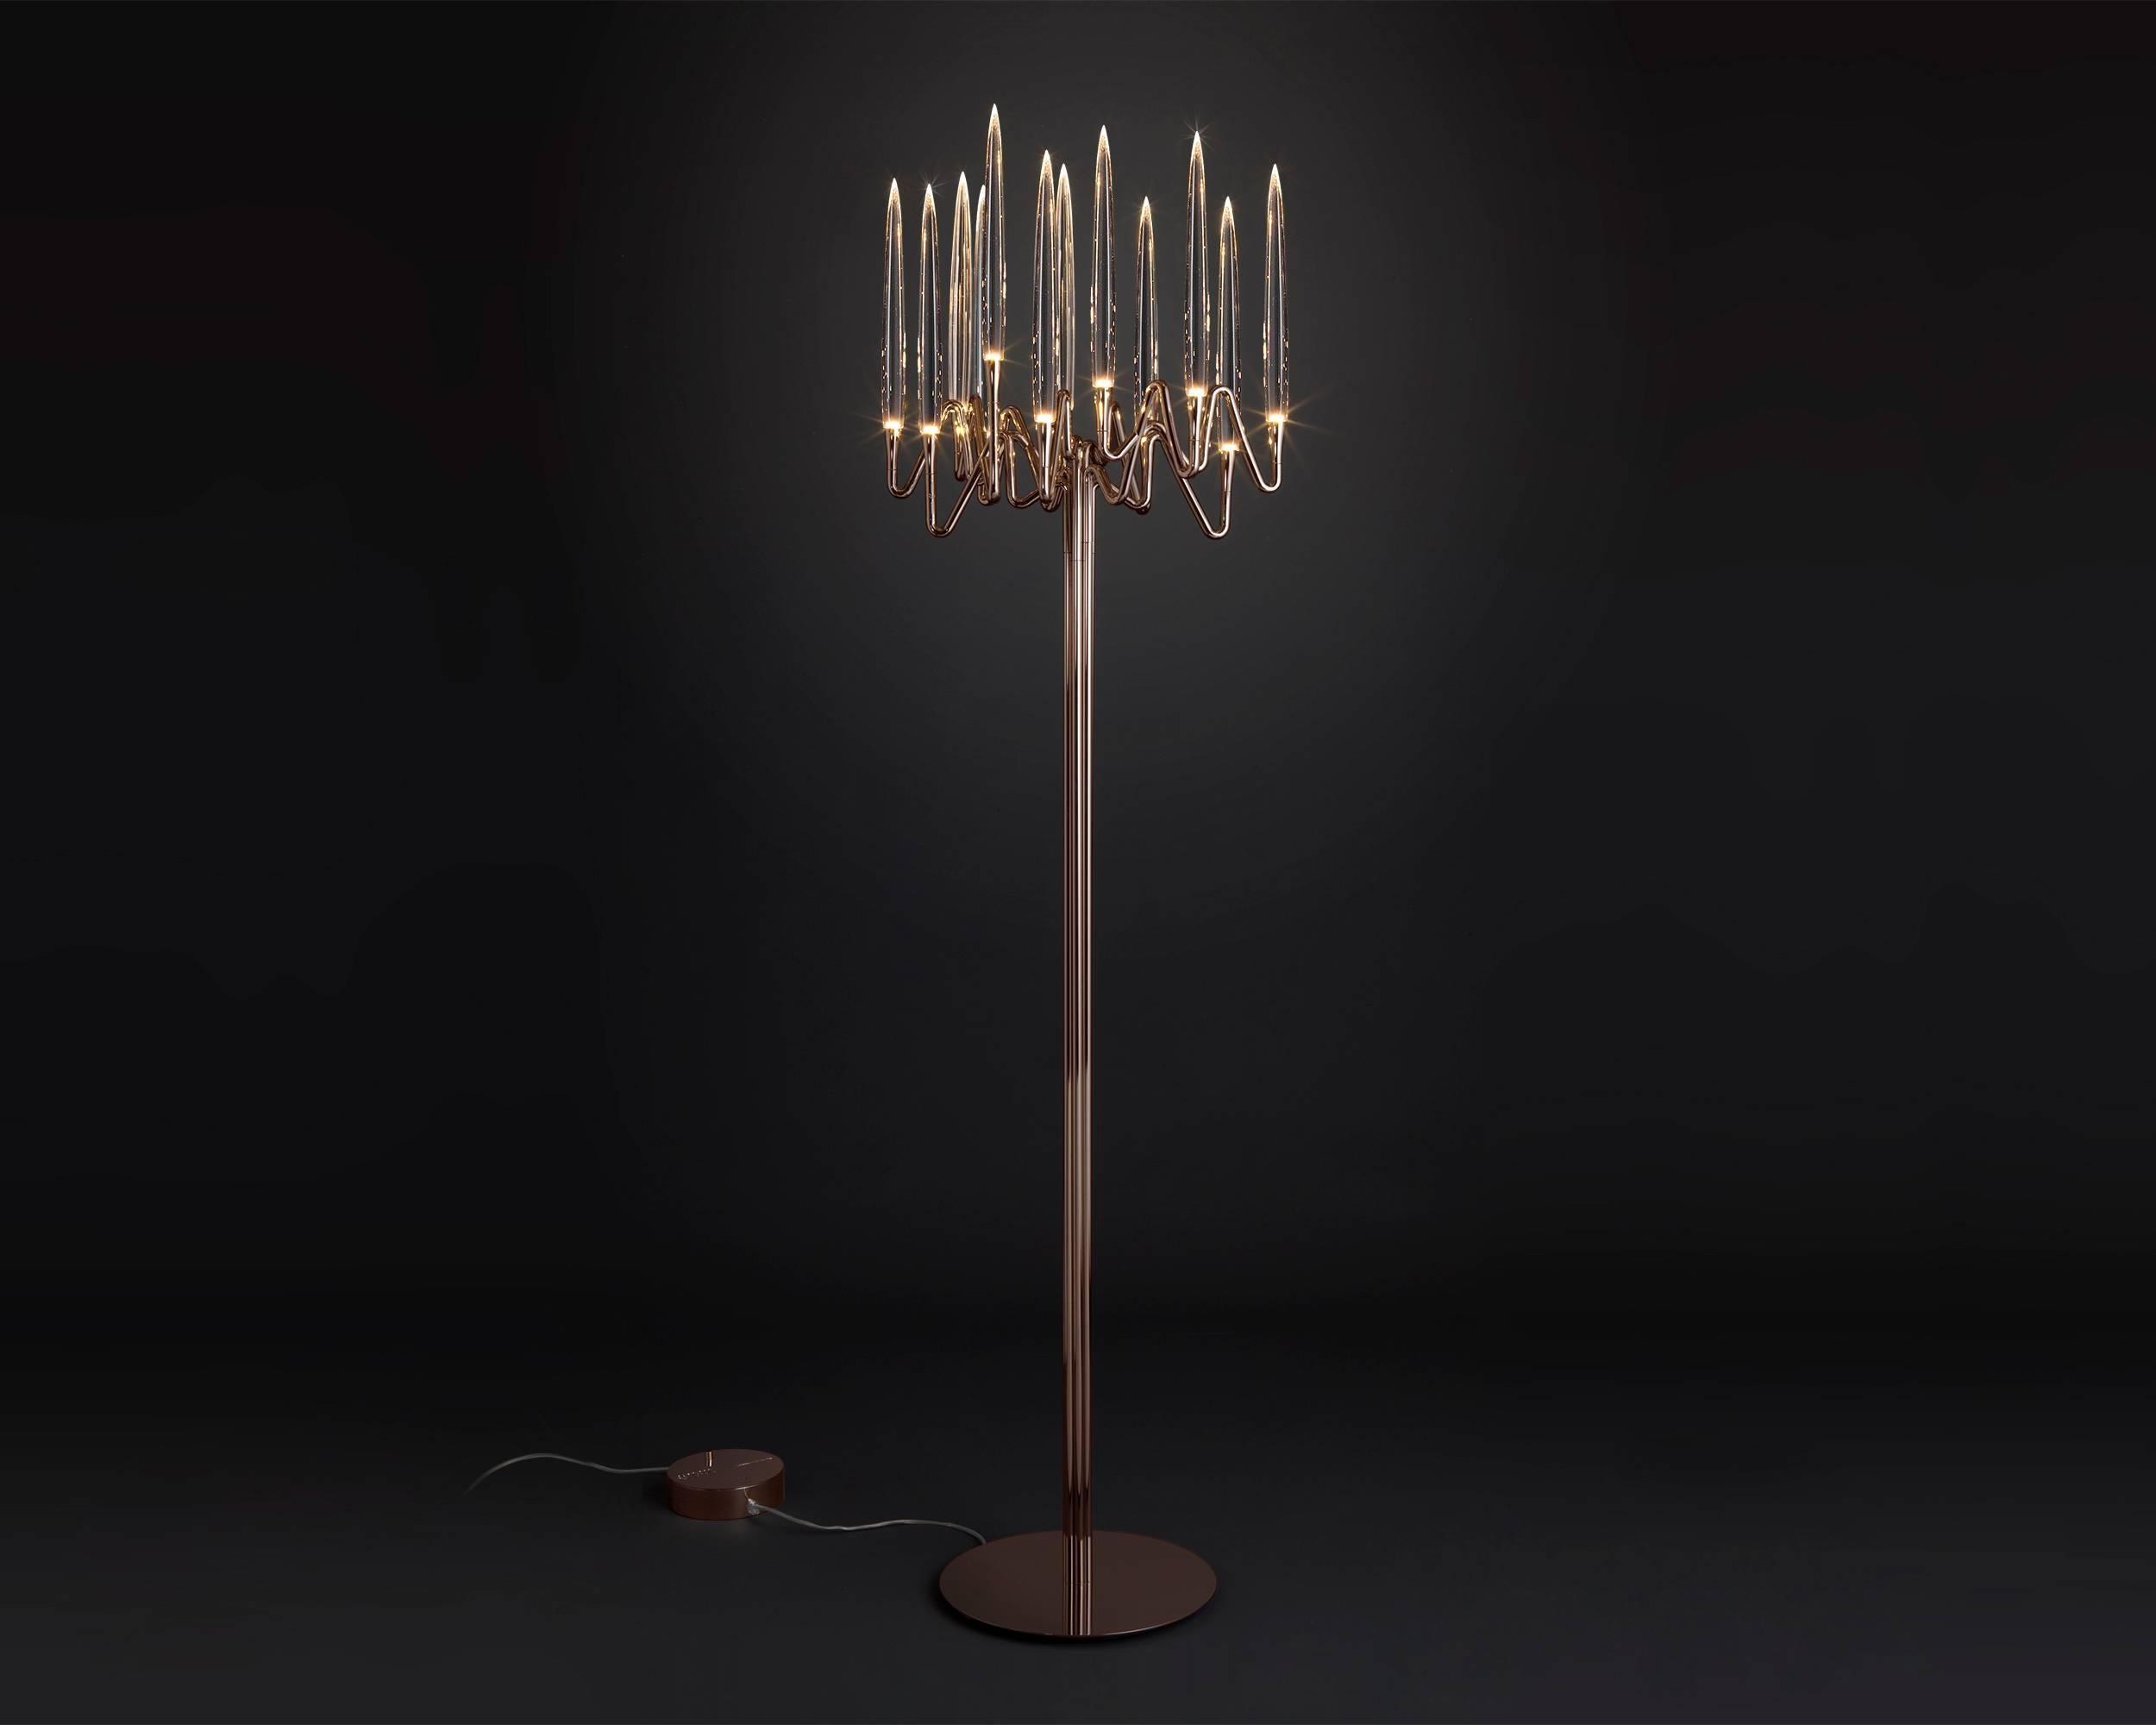 Inspired by Arabic calligraphic art and the icon of the classical candelabrum is Il Pezzo 3 Floor Lamp, with a hand-forged brass structure and elegant “candles” crafted from solid crystal.
The candles are illuminated using the latest LED